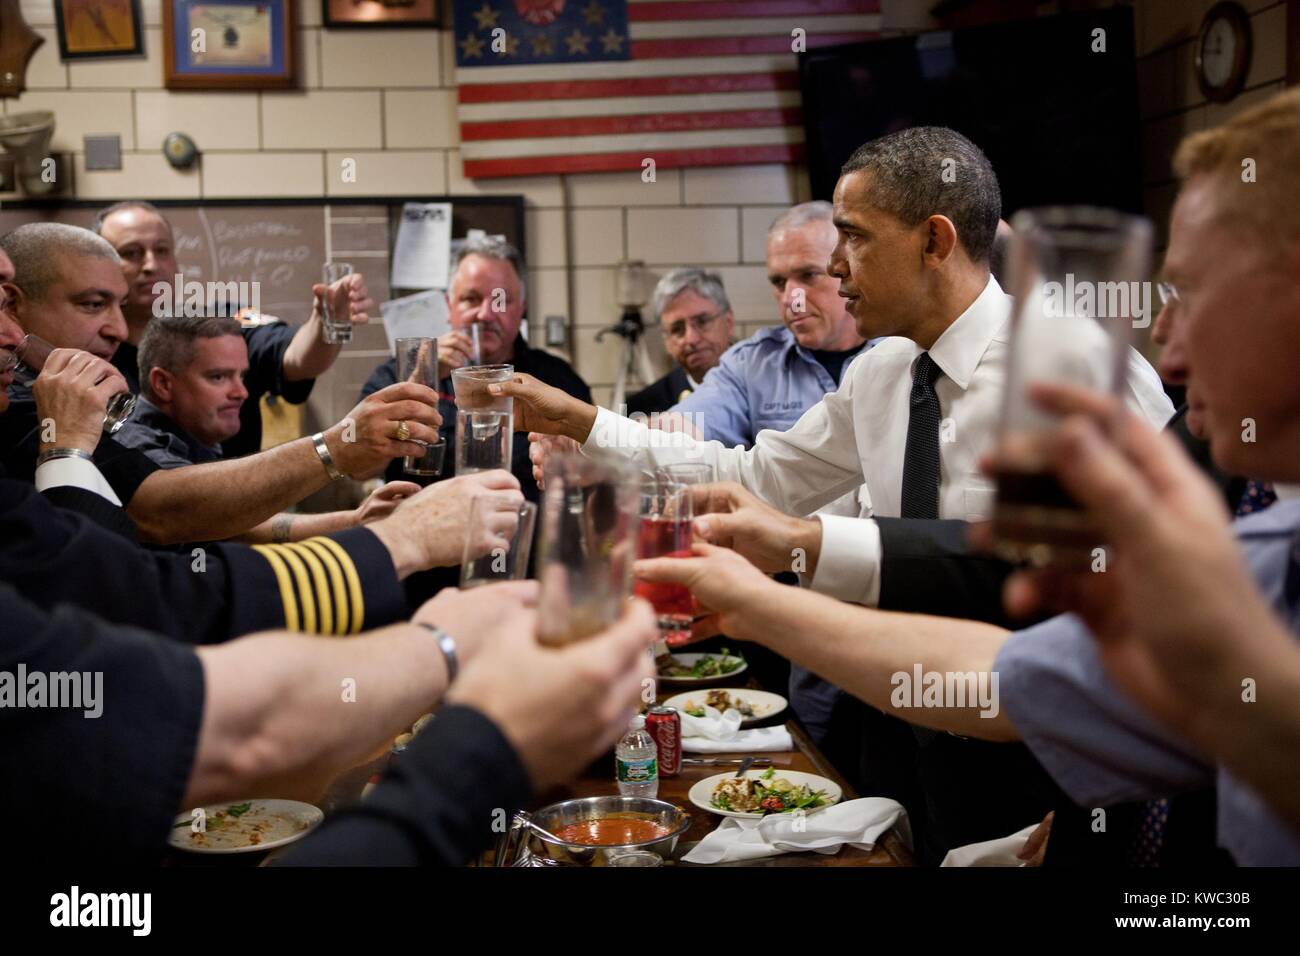 President Barack Obama and 'Pride of Midtown' firefighters toast at lunch on May 5, 2011. Engine 54, Ladder 4, Battalion 9 Firehouse in New York City lost 15 firefighters on 9/11 -- an entire shift and more than any other New York firehouse. (BSLOC 2015 13 161) Stock Photo